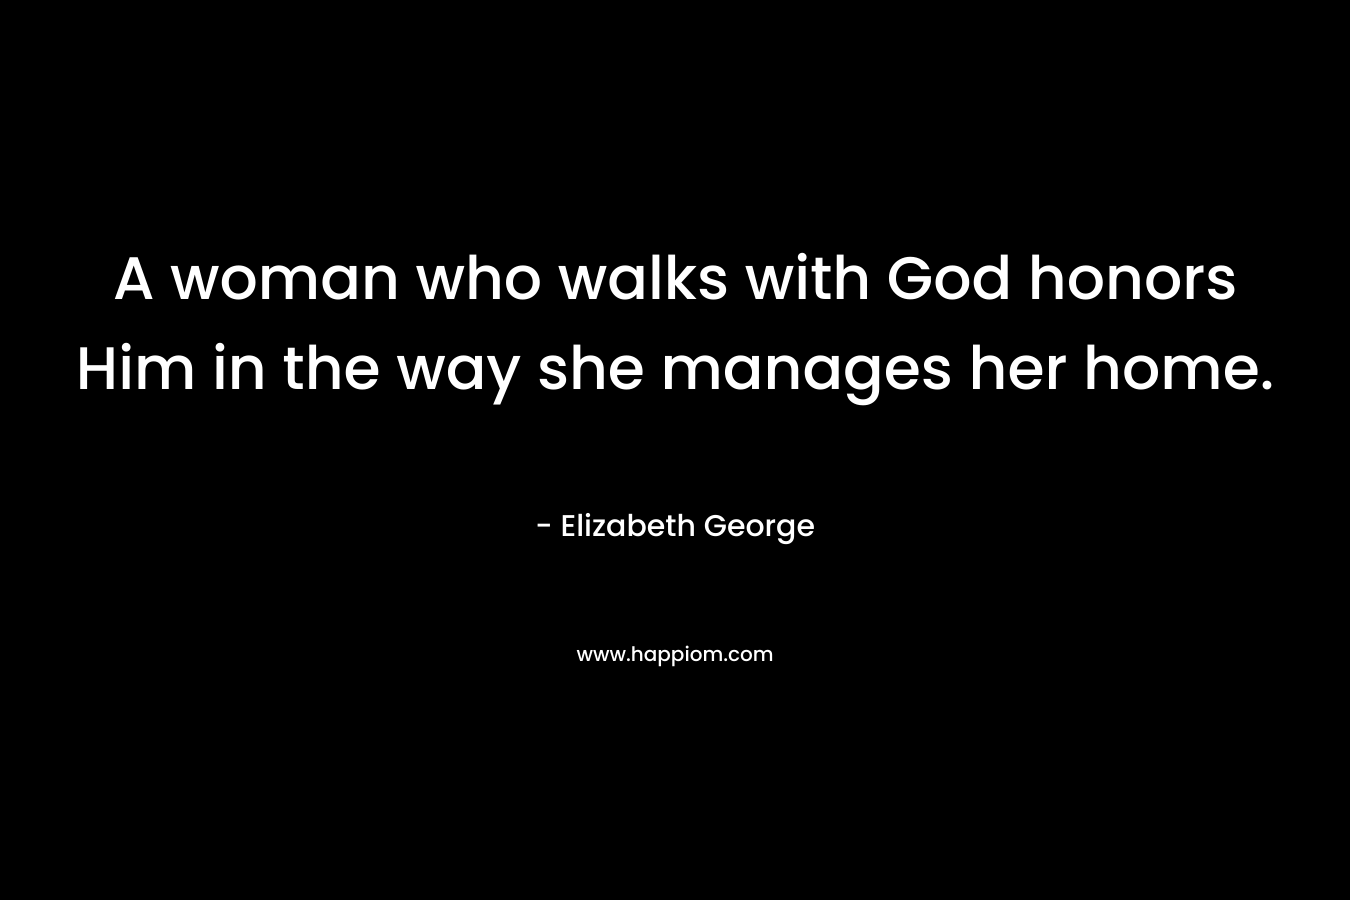 A woman who walks with God honors Him in the way she manages her home.